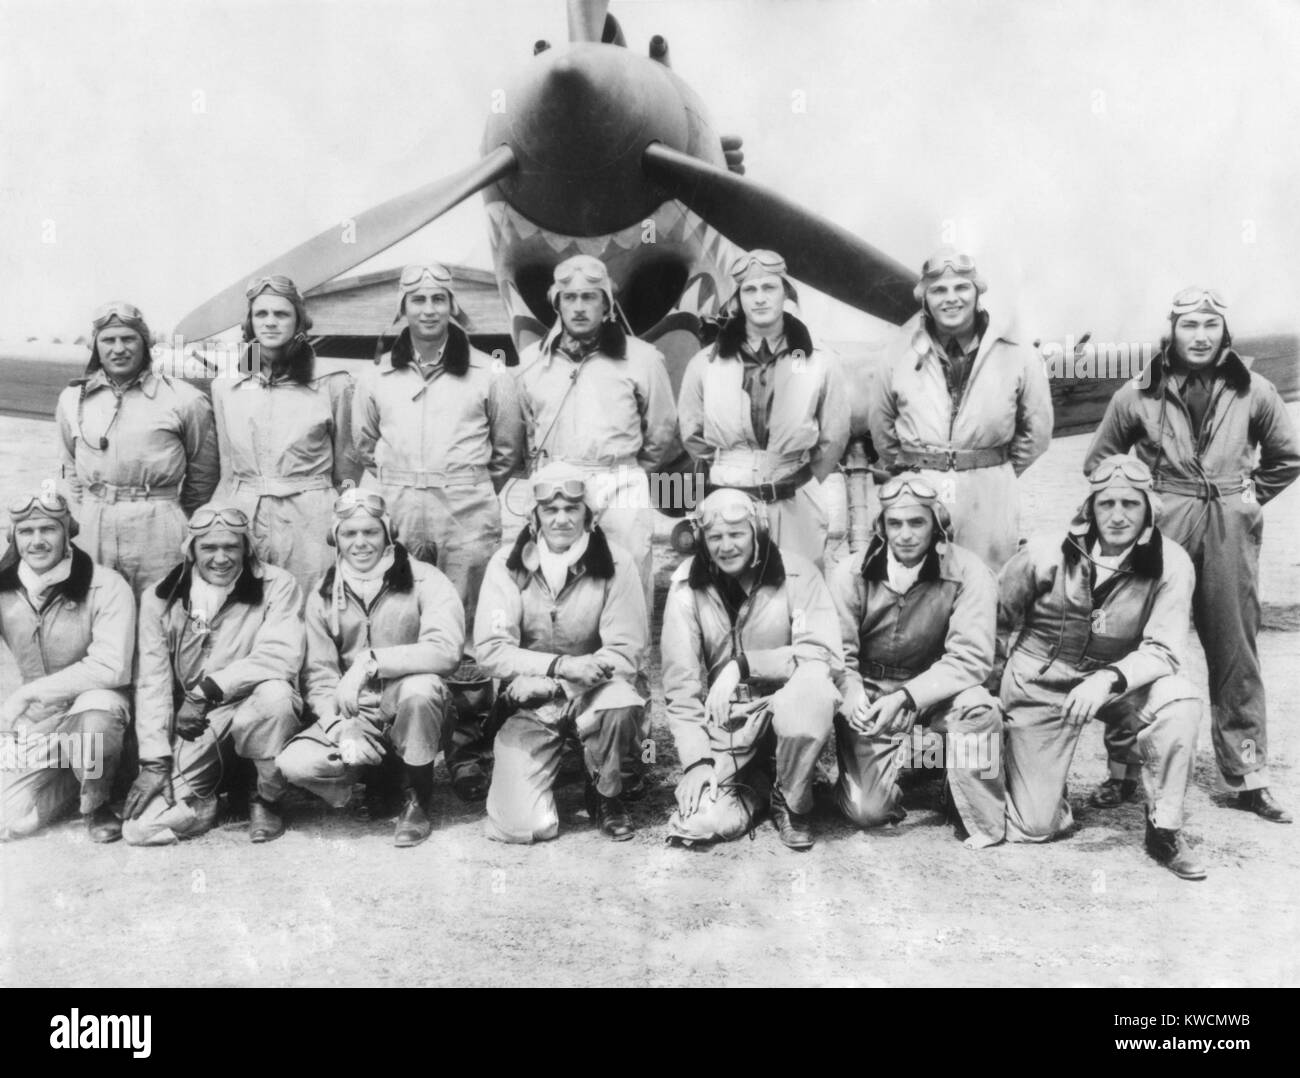 Pilots of the Flying Tigers, American volunteers flying and fighting in China in March 1942. L-R Front Row: C.R. Bond; G.L. Paxton; P. Wright; J.V. Newkirk; D.L. Hill; J. G. Bright; and E.S. Conant. Rear Row: R.B. Keeton; F. Lawlor; F.I. Ricketts; R.F. Layher; H.M. Geselbracht; T.A. Jones; F. Schiel. - (BSLOC 2014 14 14) Stock Photo